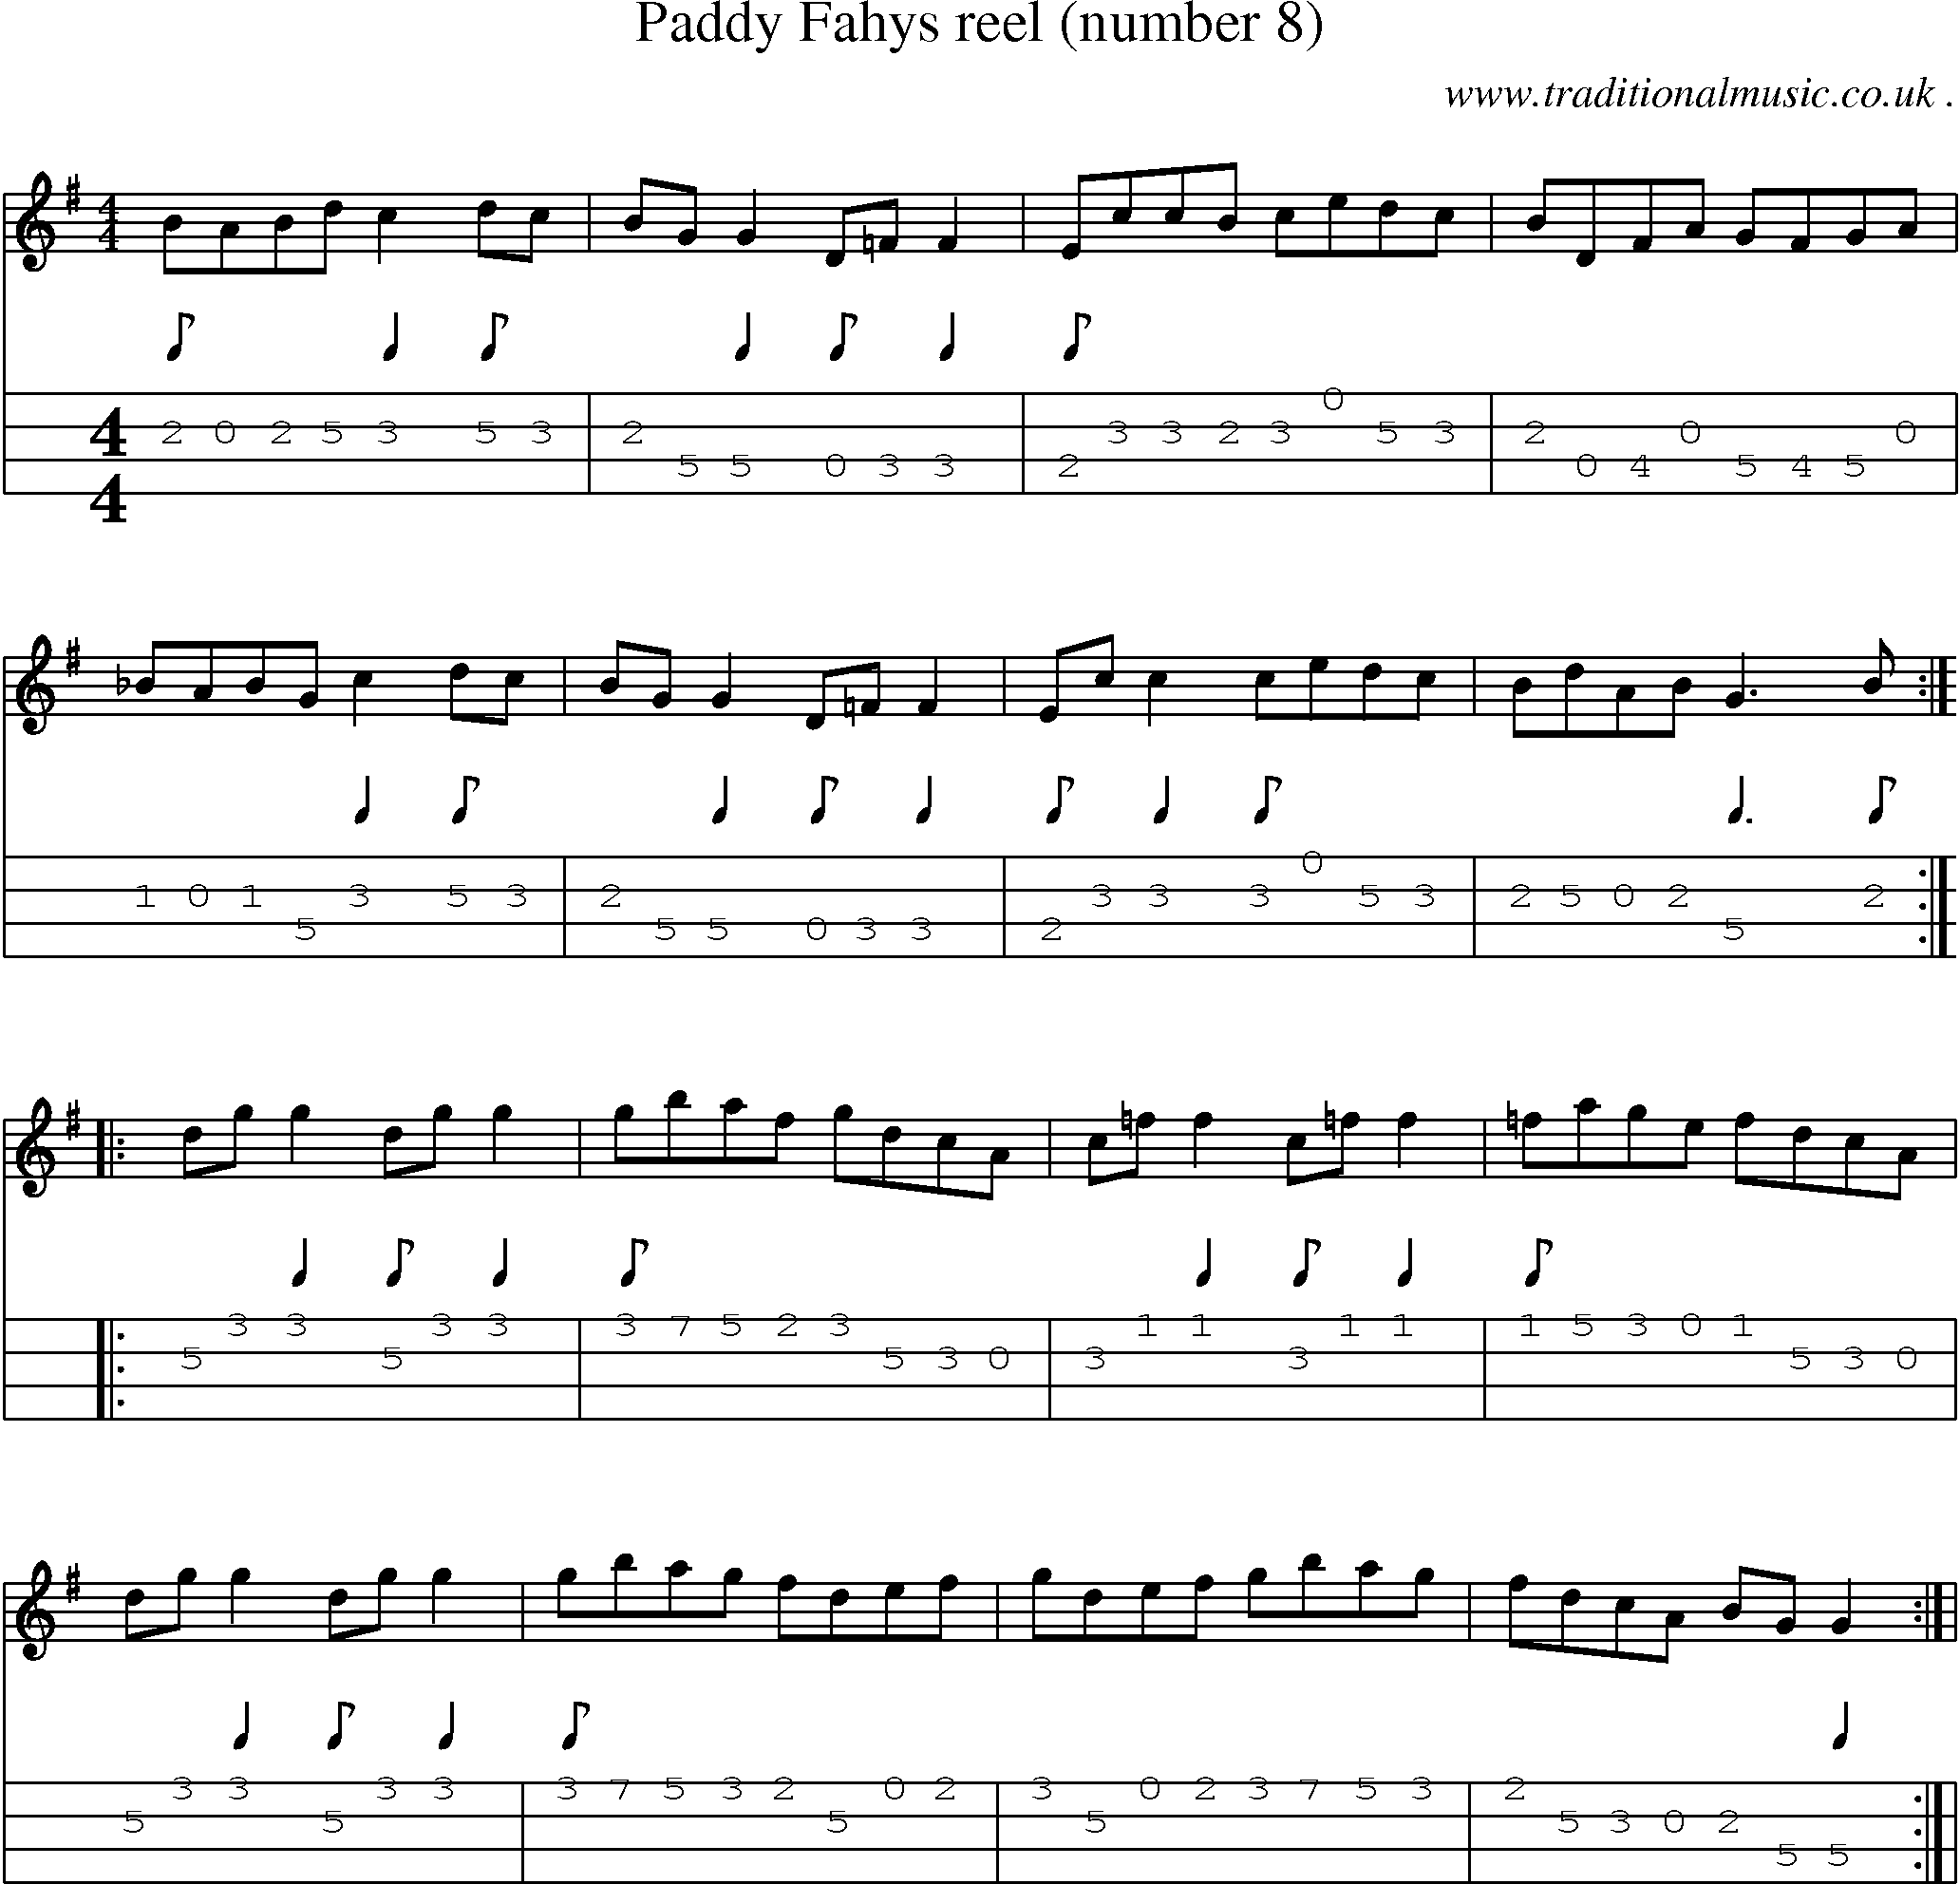 Sheet-Music and Mandolin Tabs for Paddy Fahys Reel (number 8)